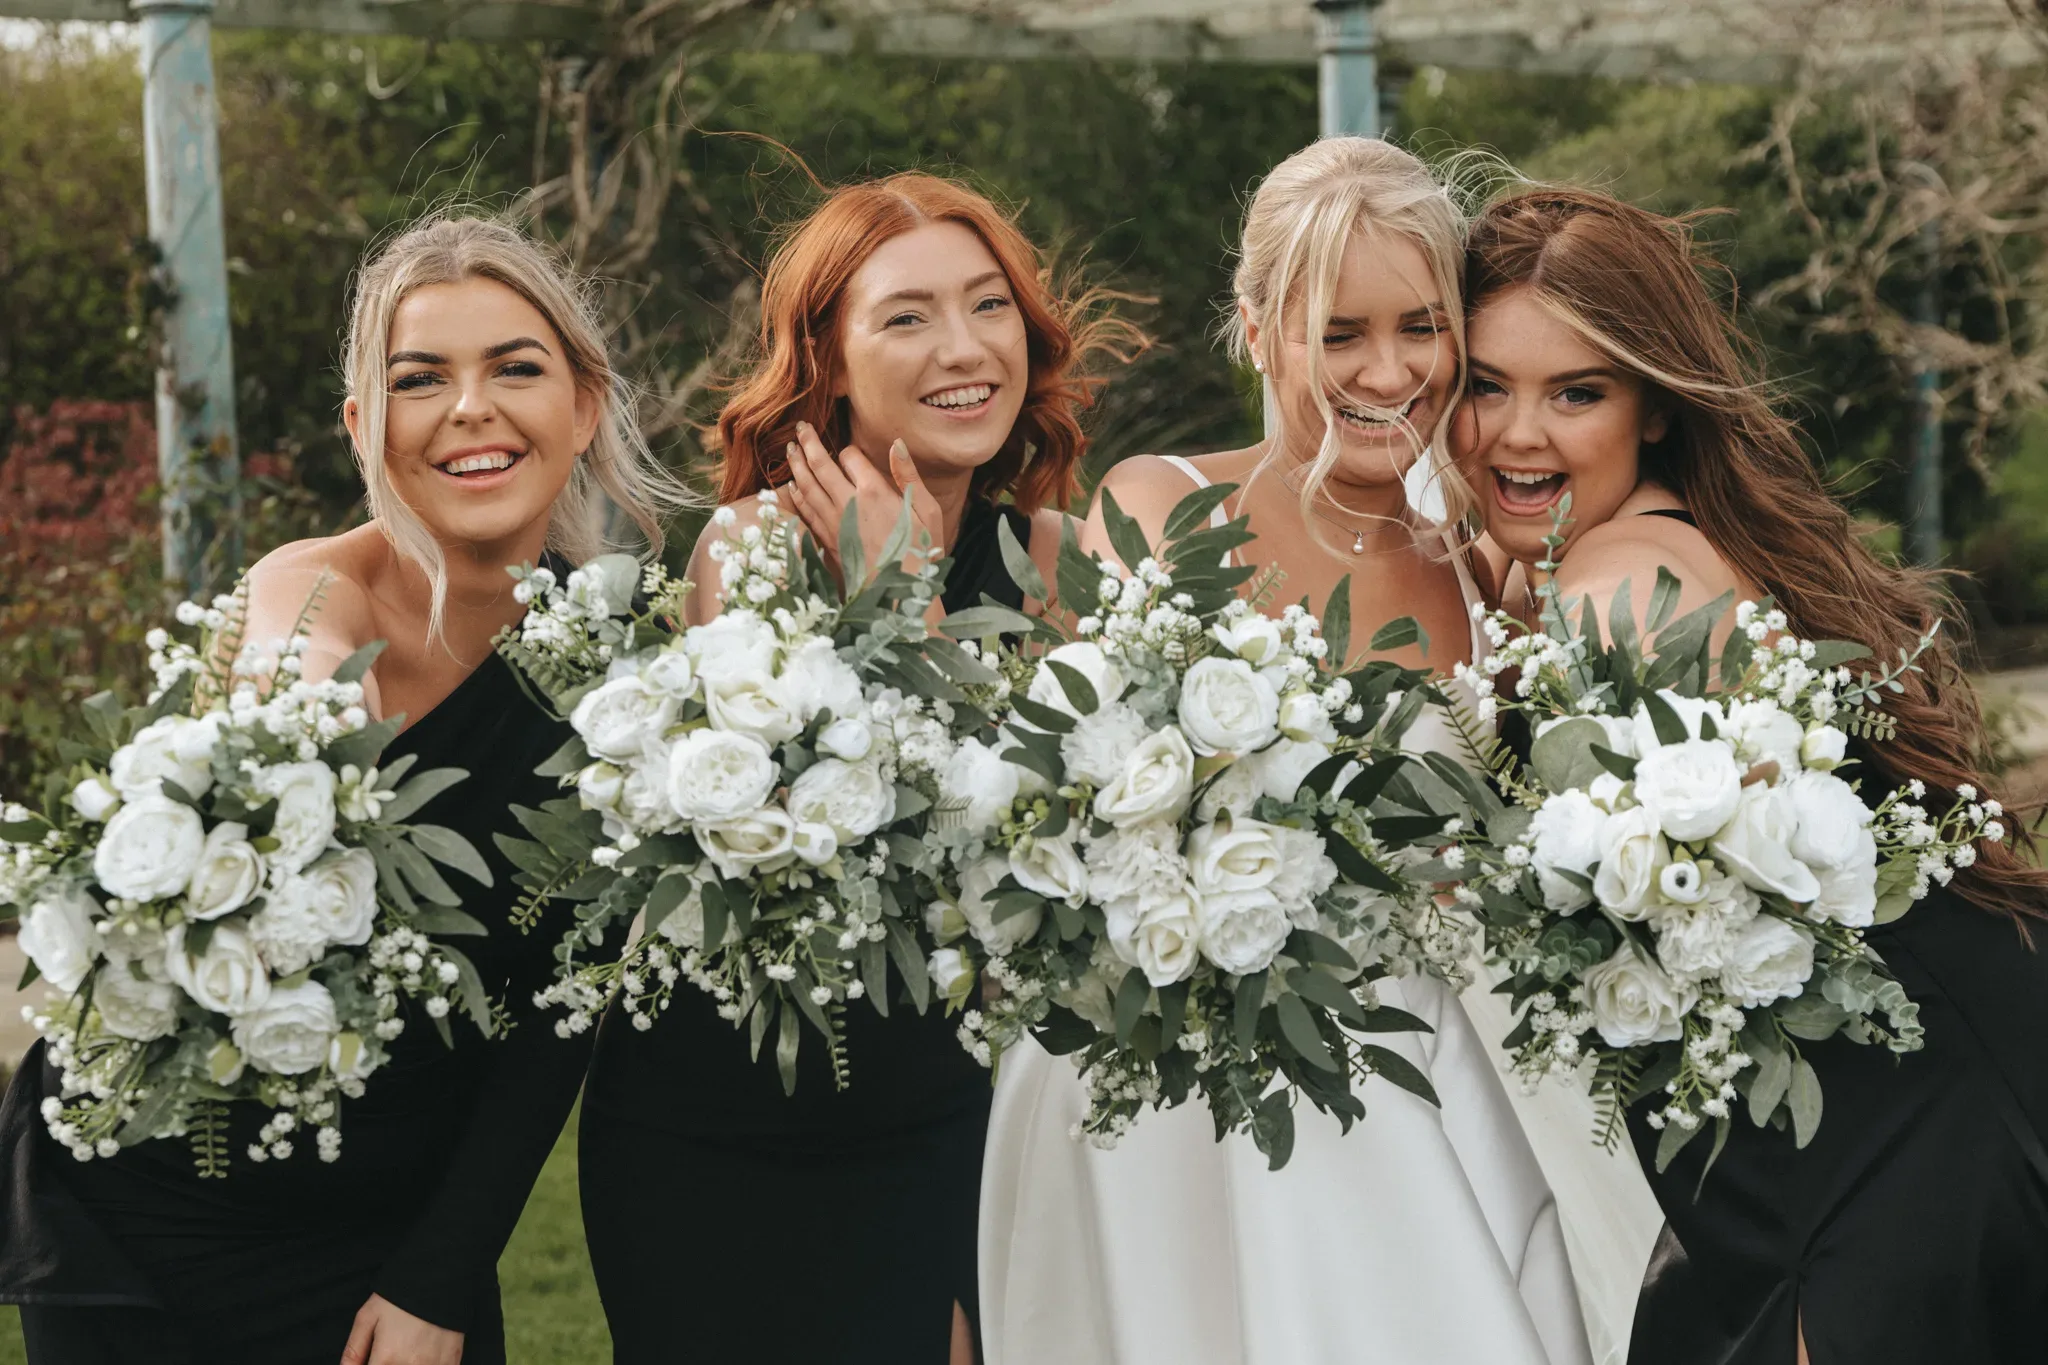 Four smiling women in formal wear, holding bouquets with white flowers, posing together at an outdoor event, likely a wedding. the bride in the center wears white, while the others wear black.